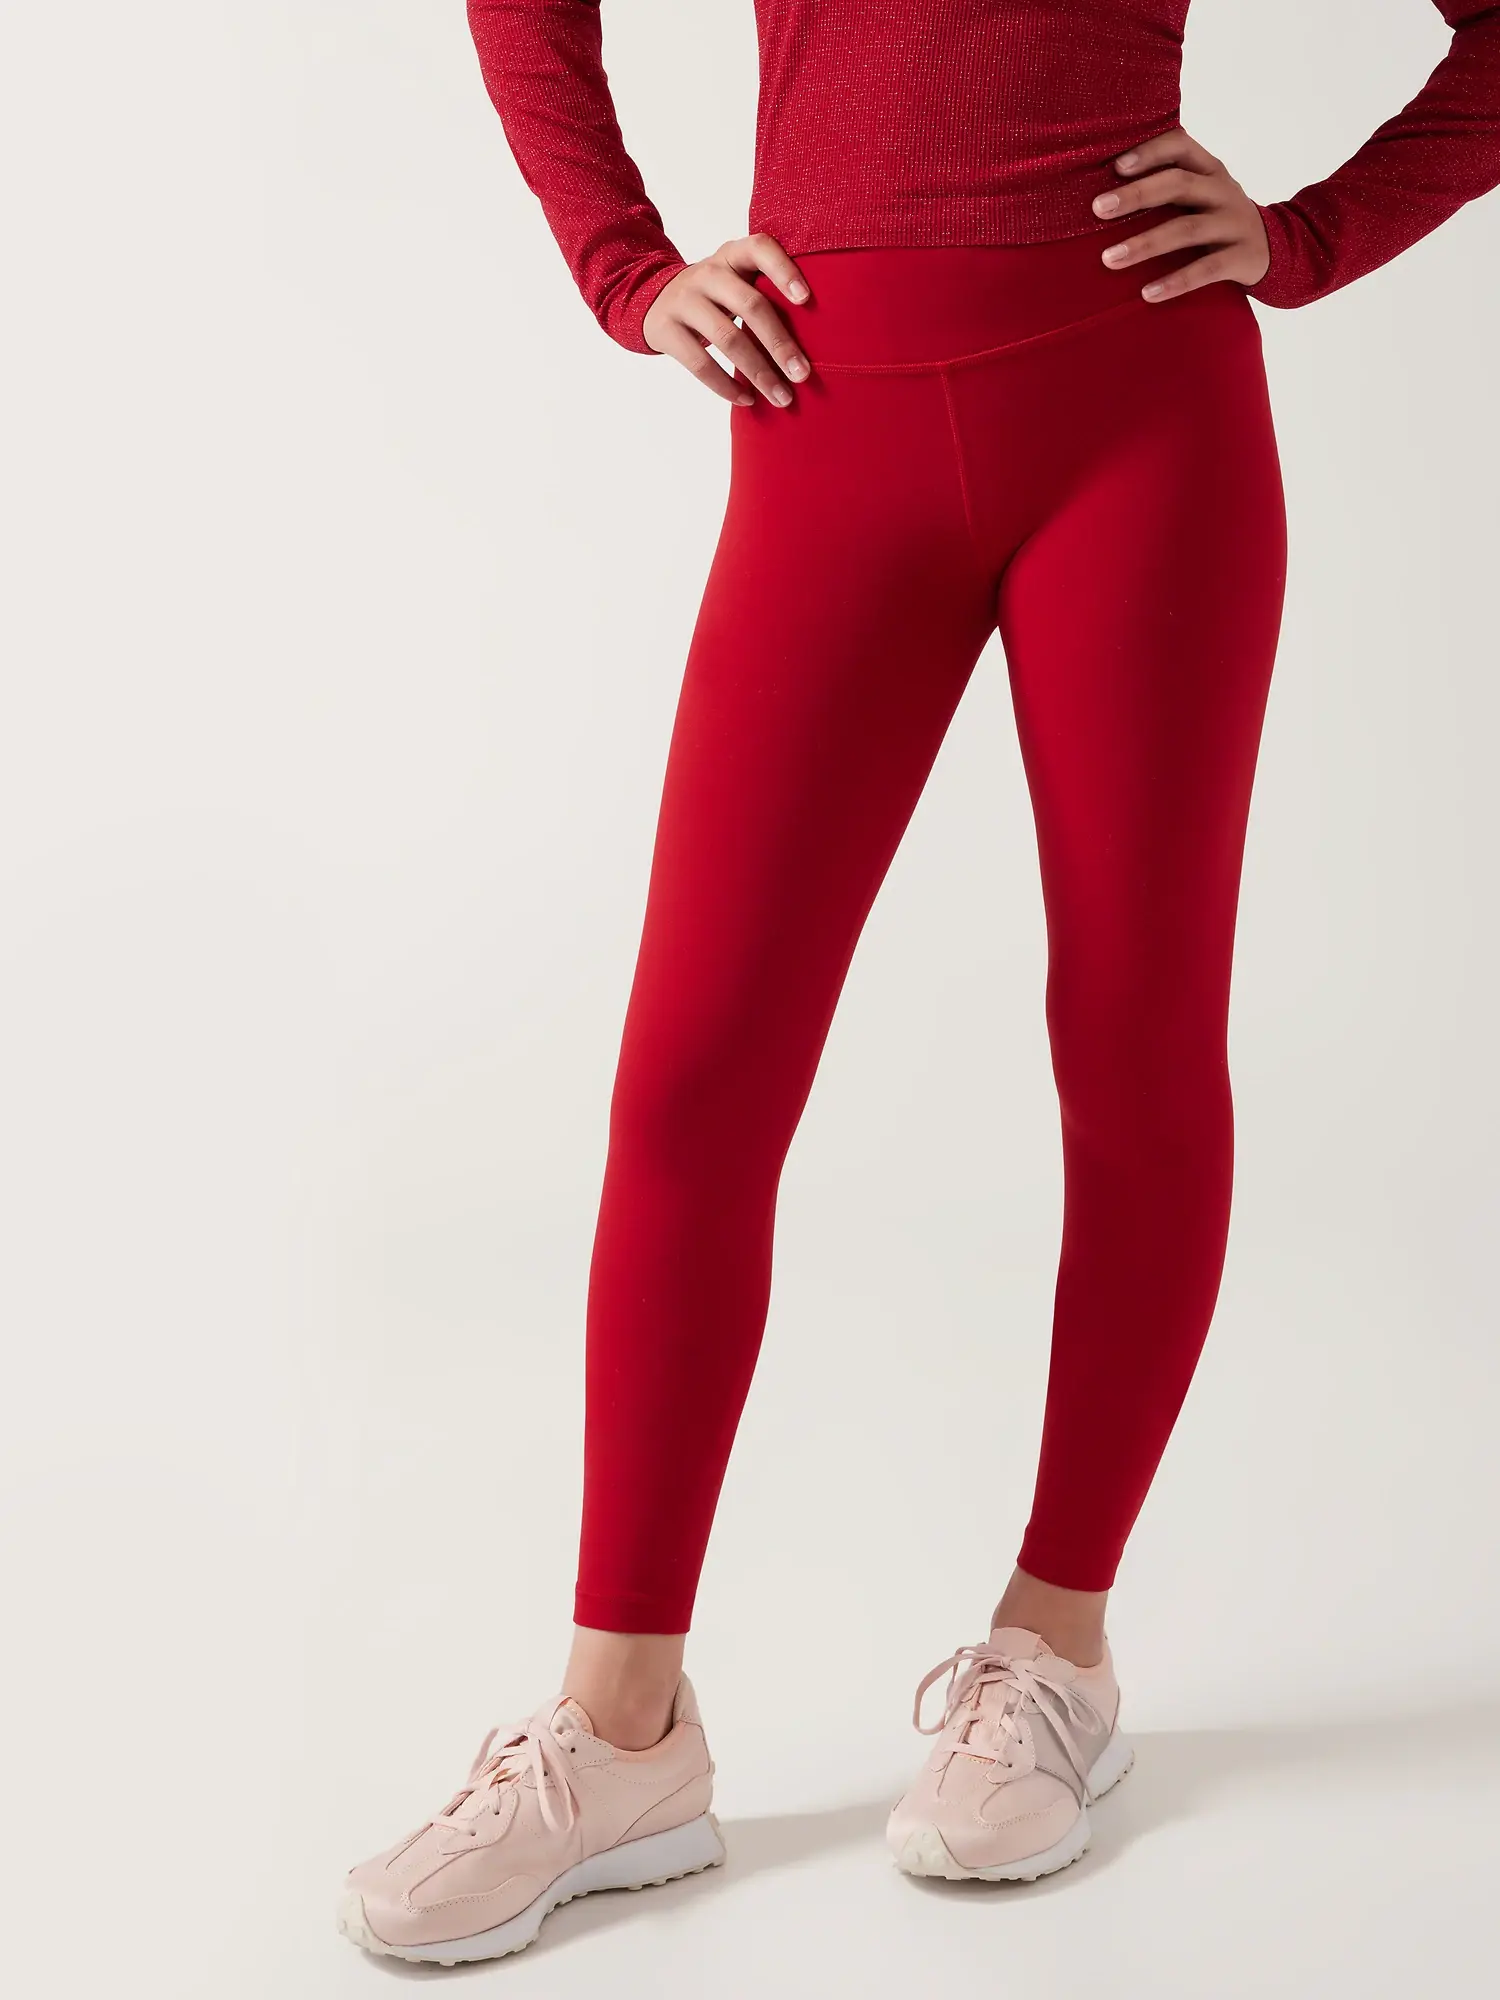 Athleta Girl High Rise Powervita Chit Chat Tight red. 1